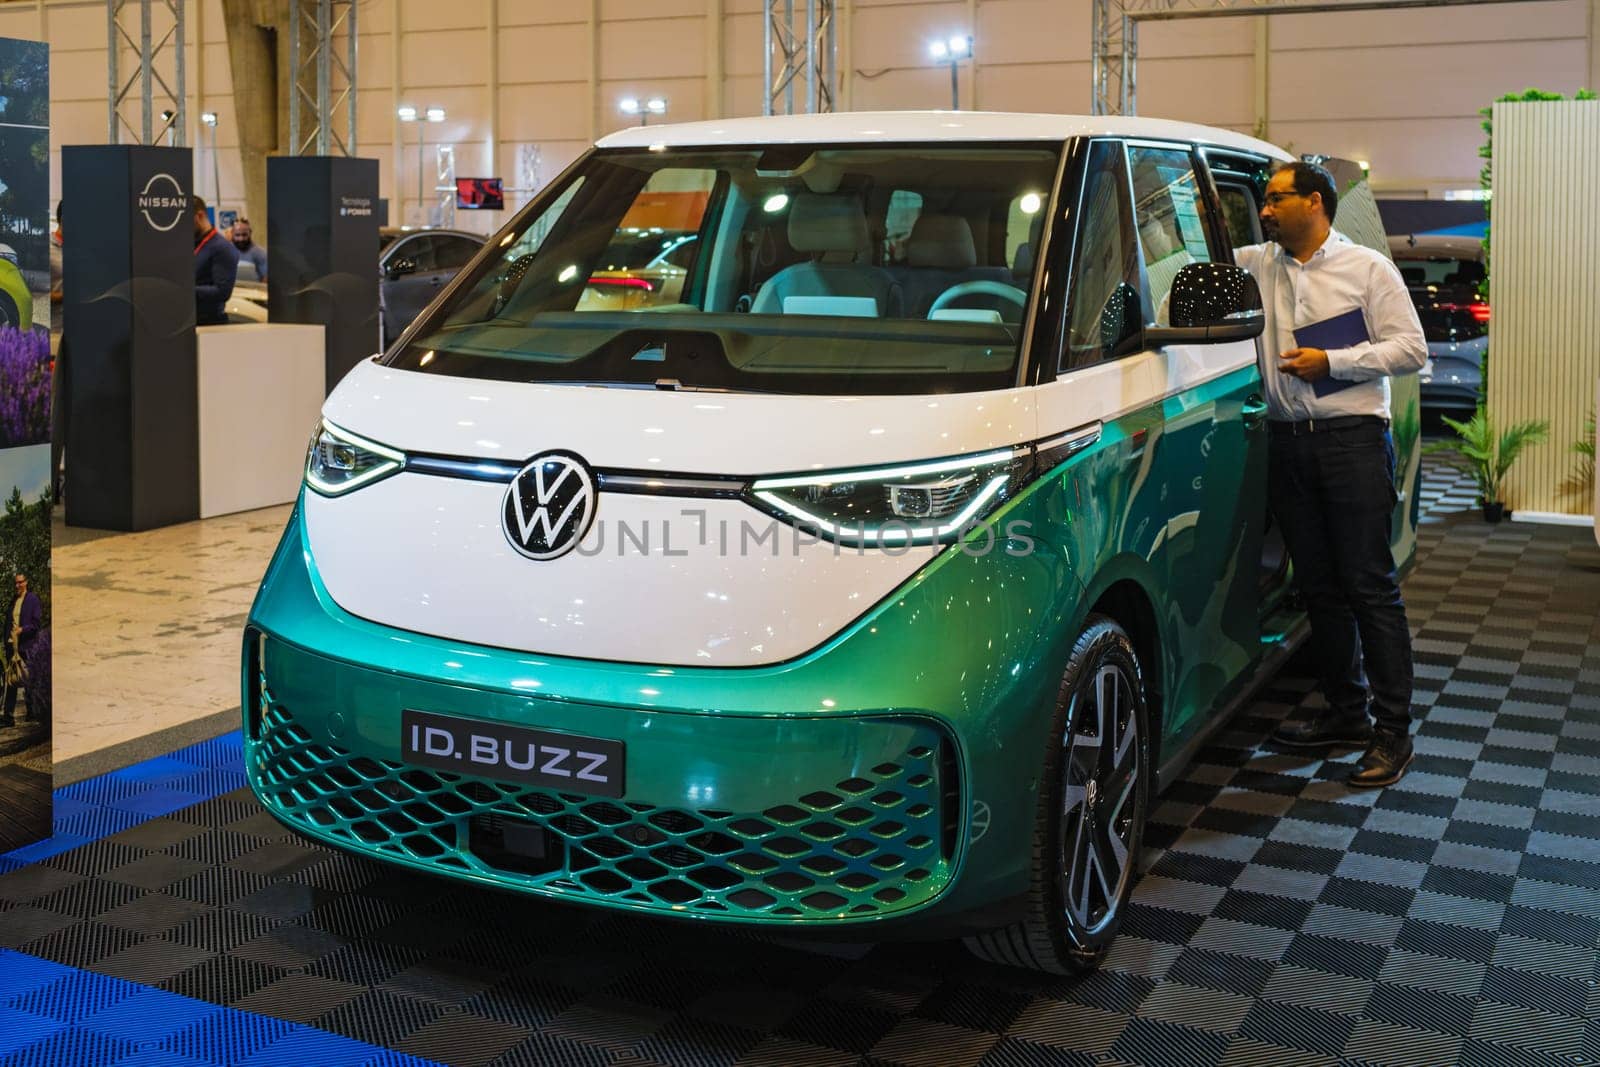 VW ID.Buzz electric bus car at ECAR SHOW - Hybrid and Electric Motor Show by dimol